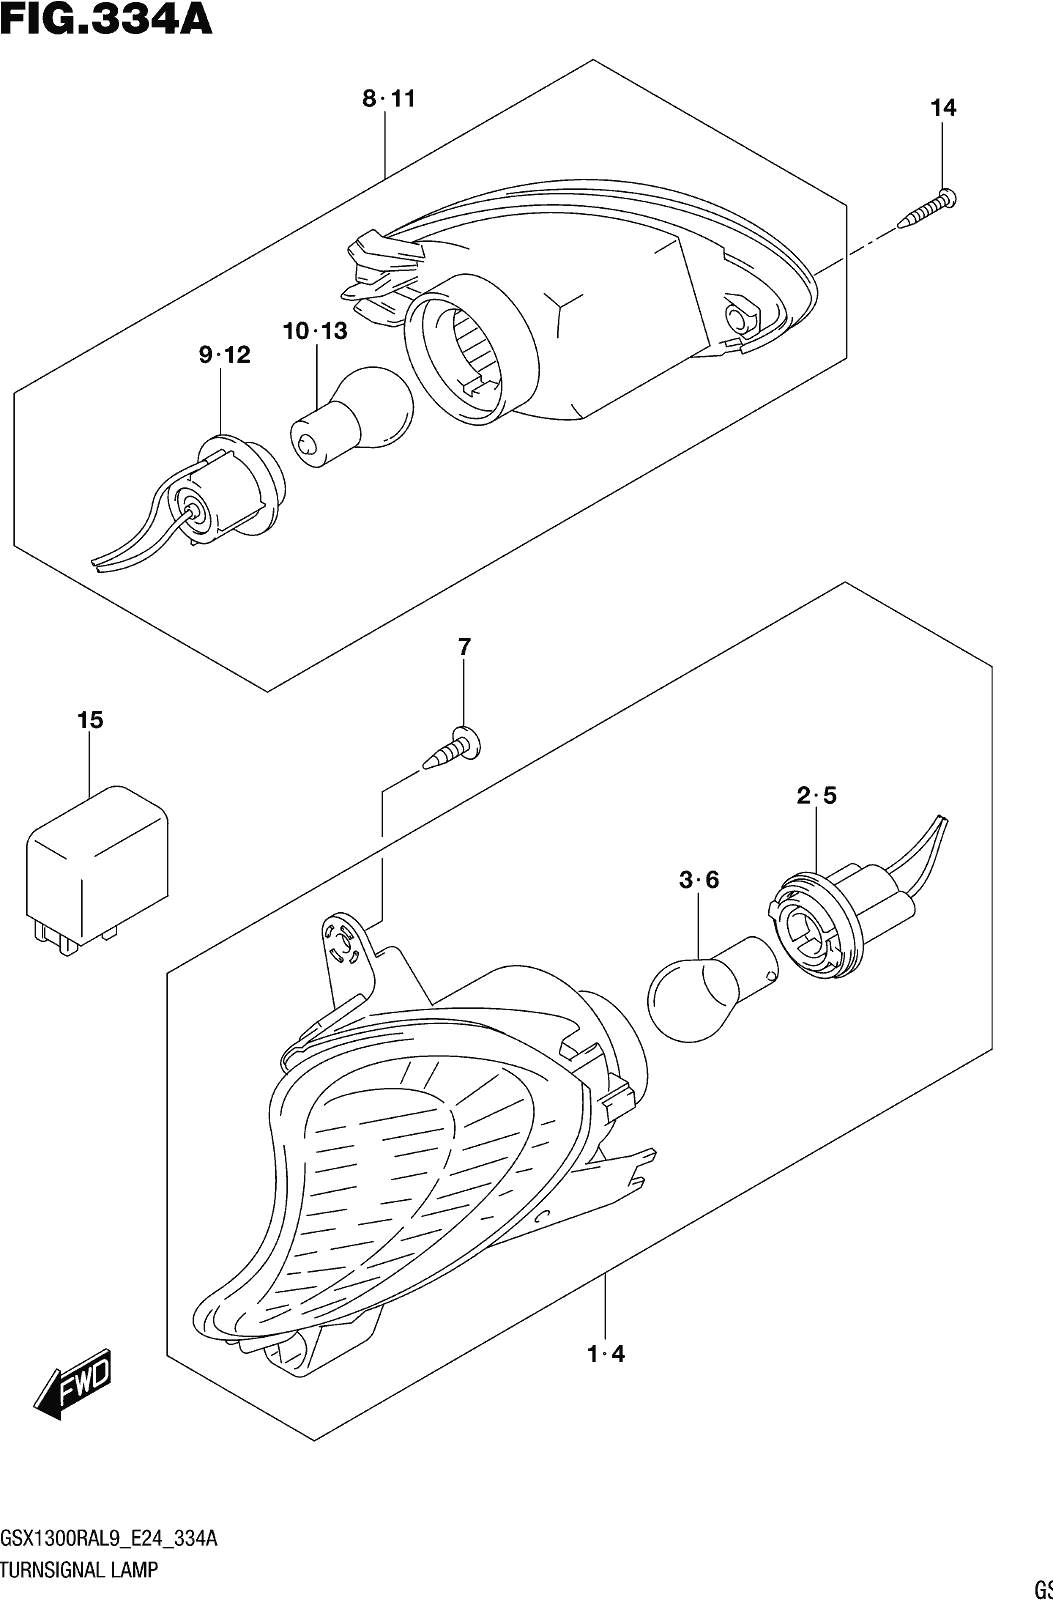 Fig.334a Turnsignal Lamp